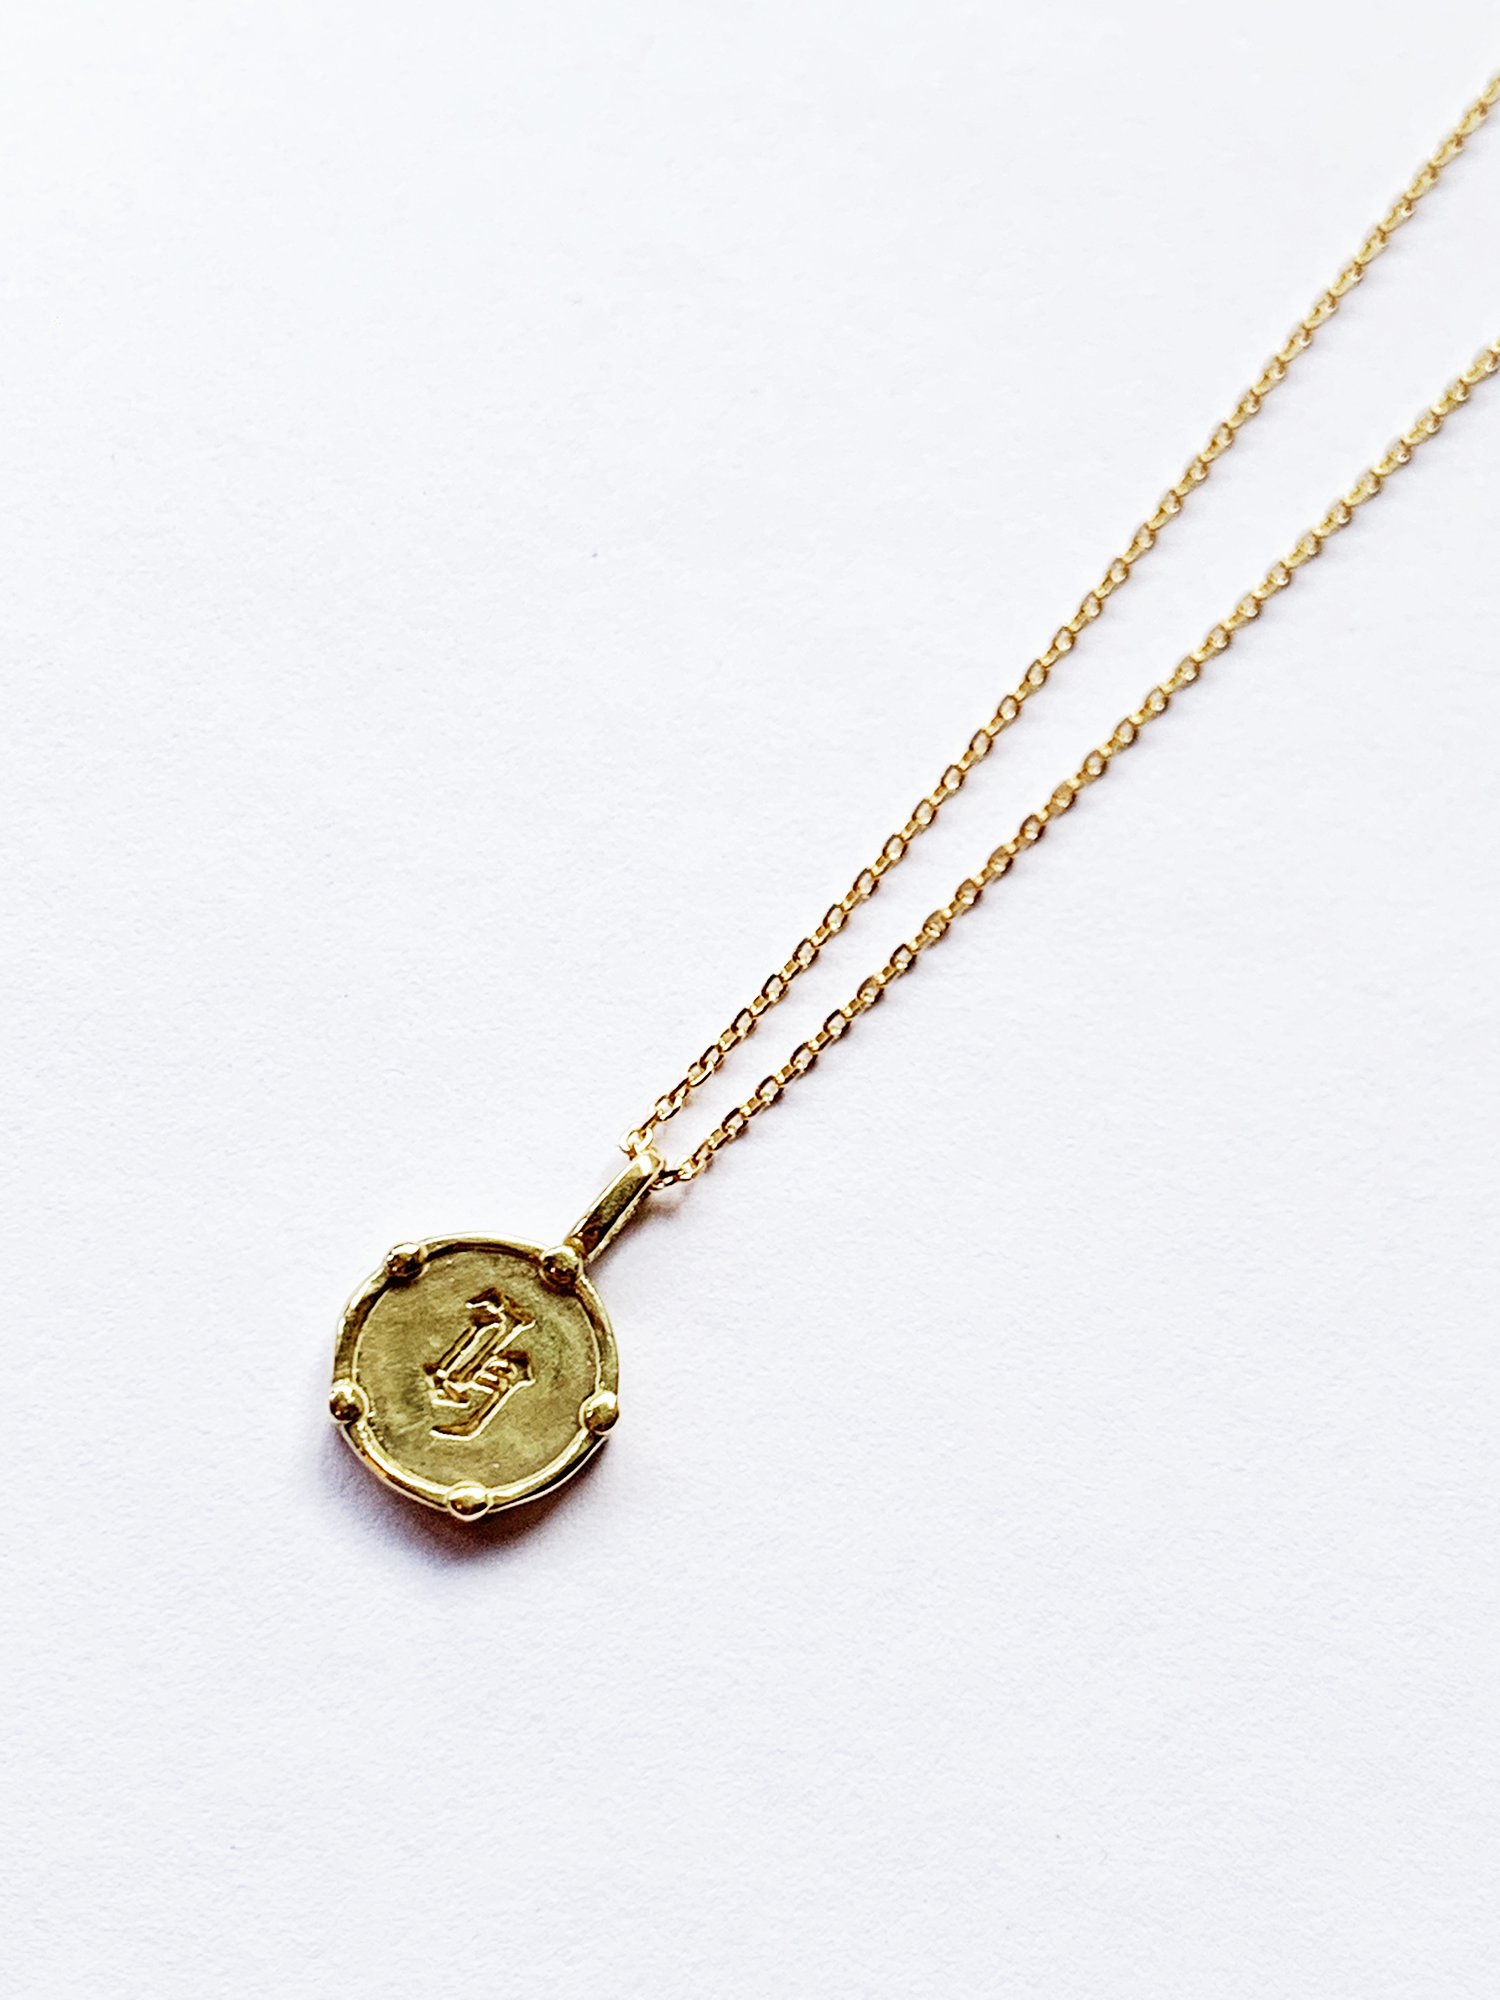 HELIOS / Blackletter coin necklace